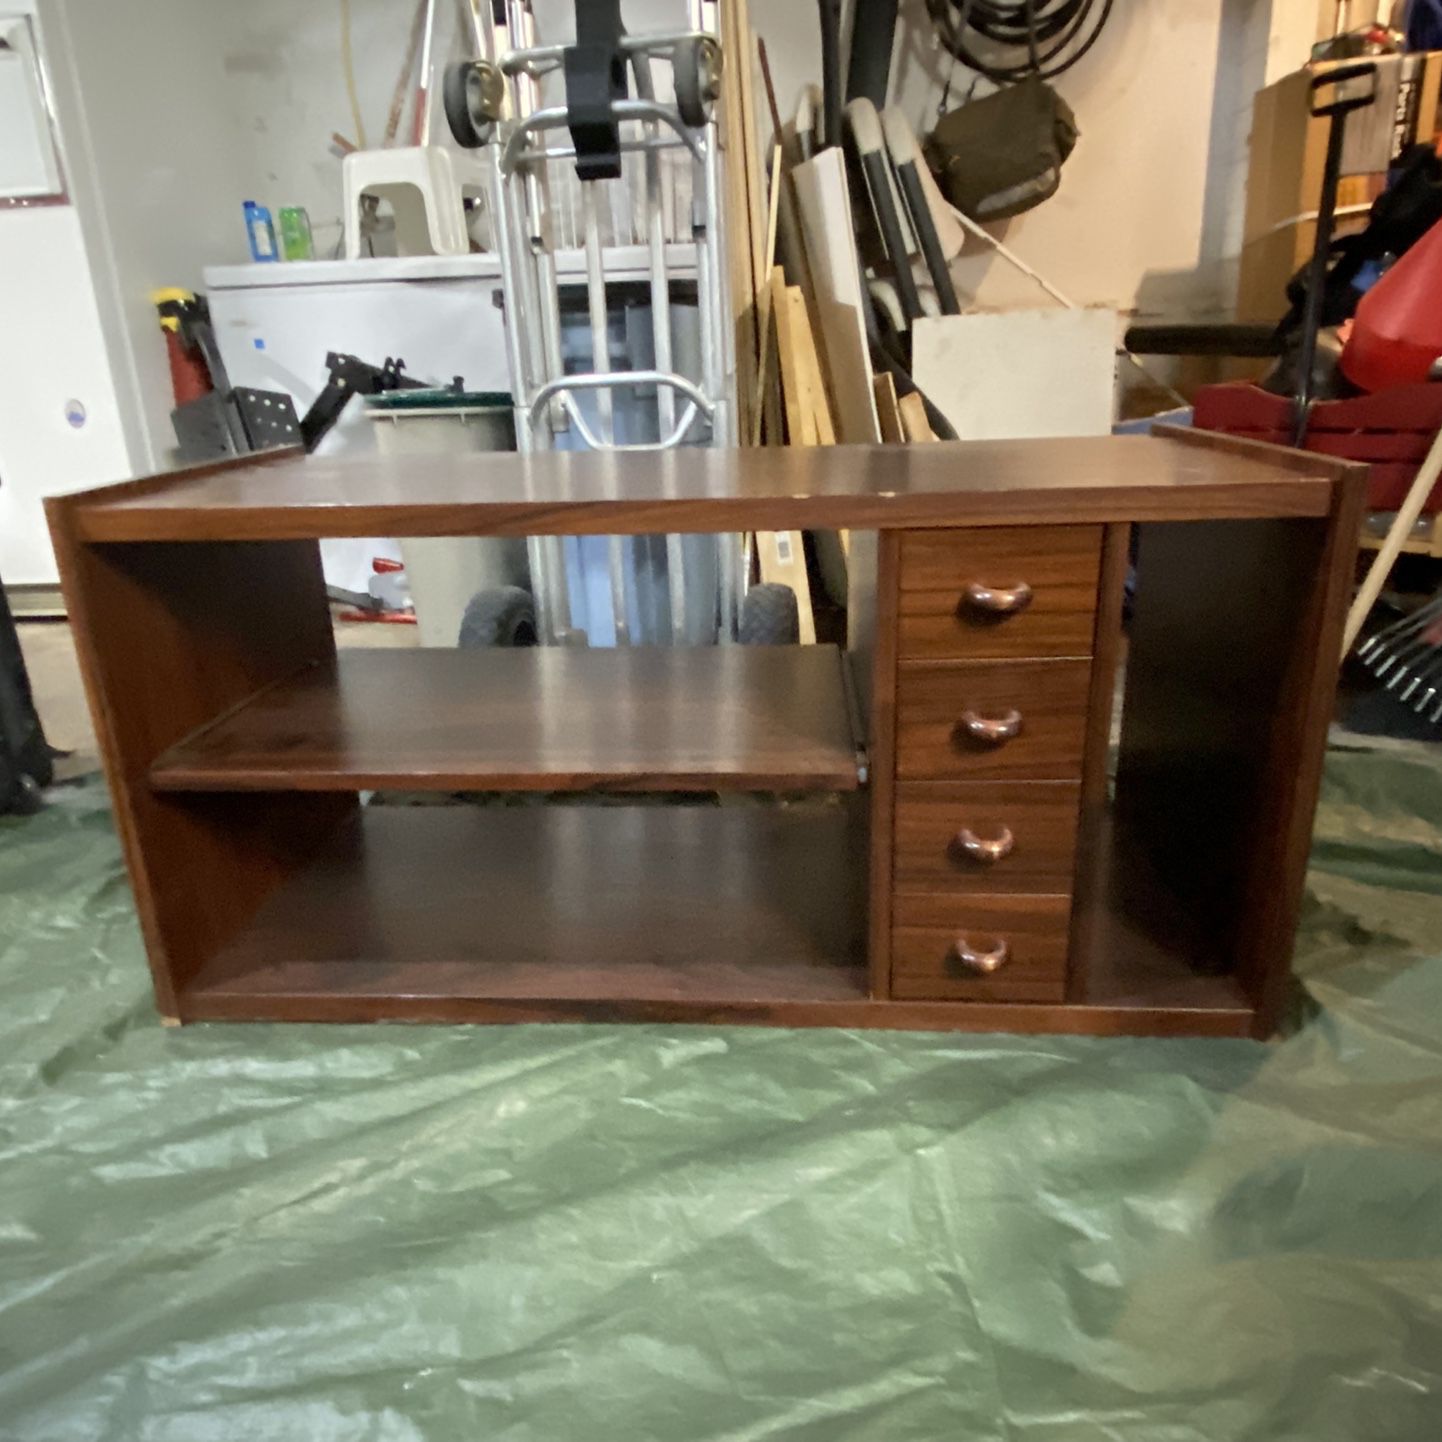 FREE Wood TV Stand! Pick up before Saturday 